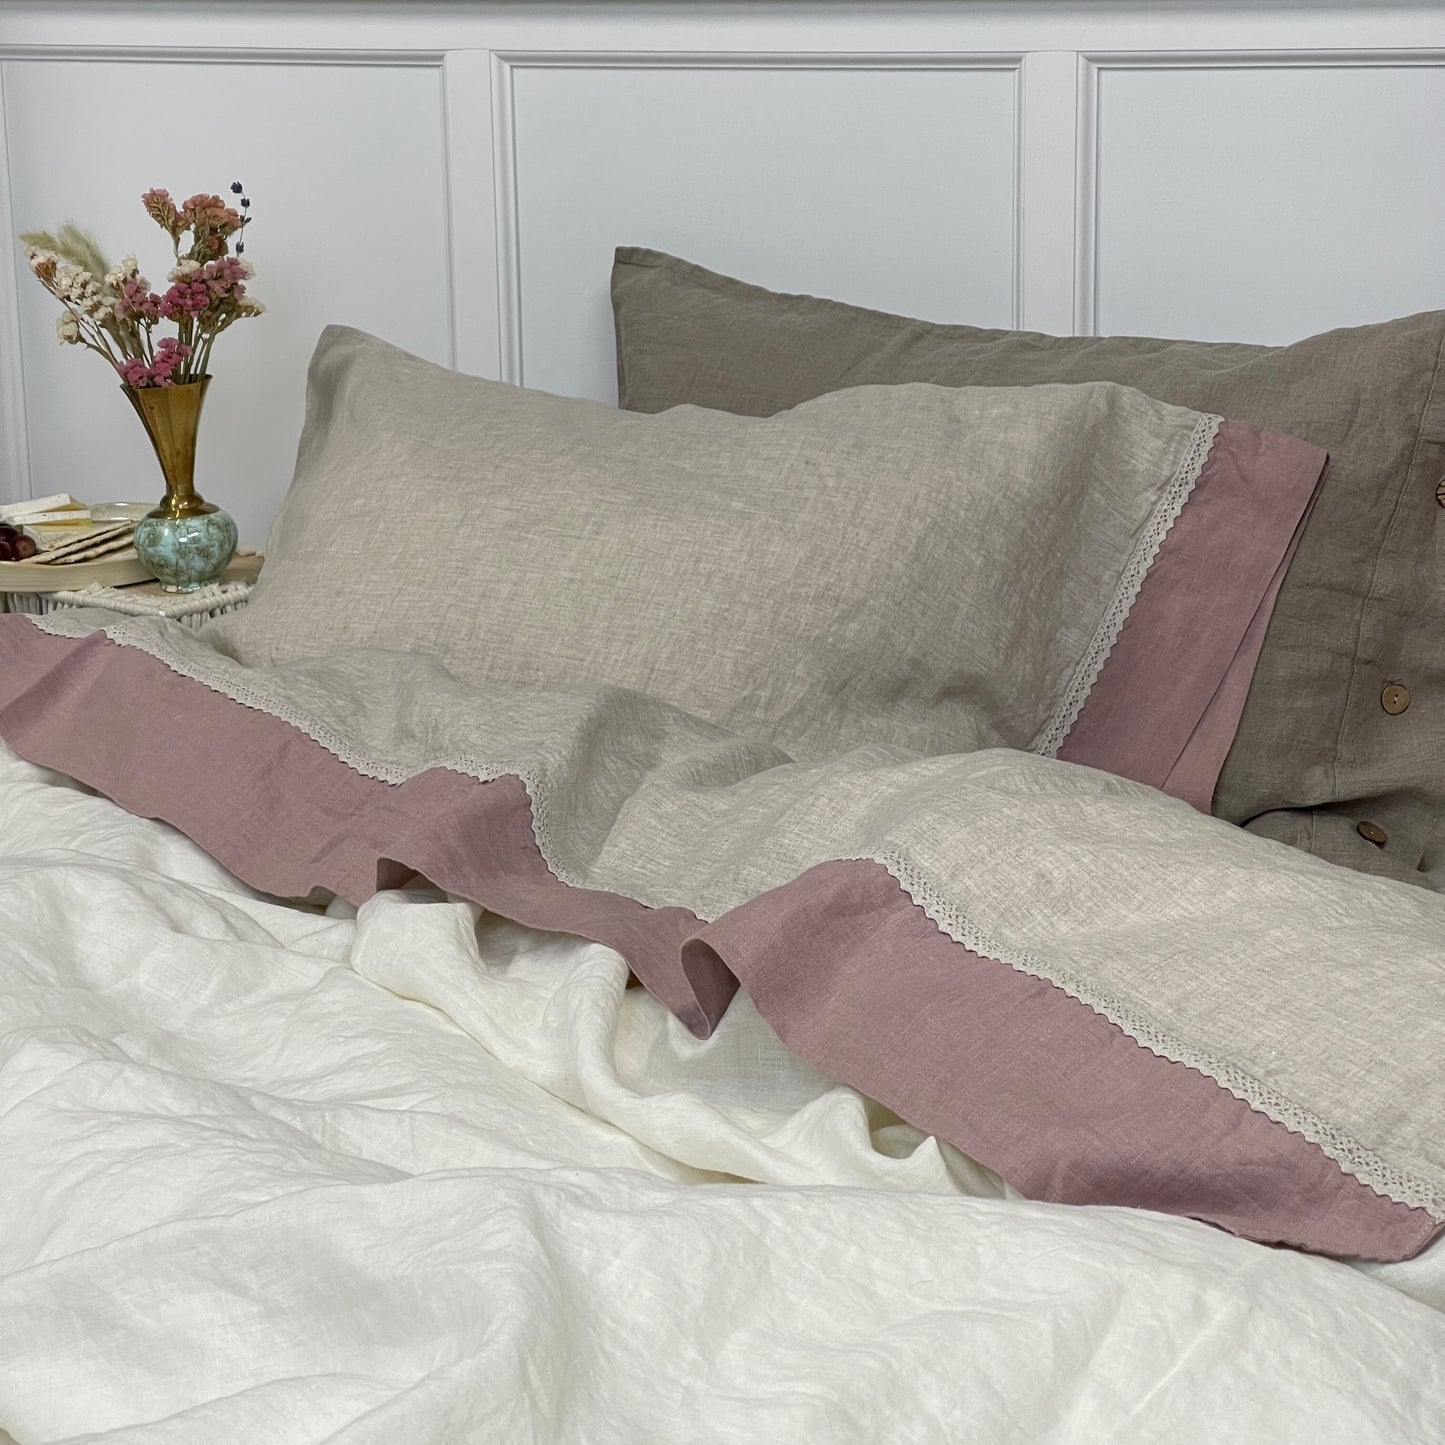 Greige Mauve Flax Pillowcase with Lace